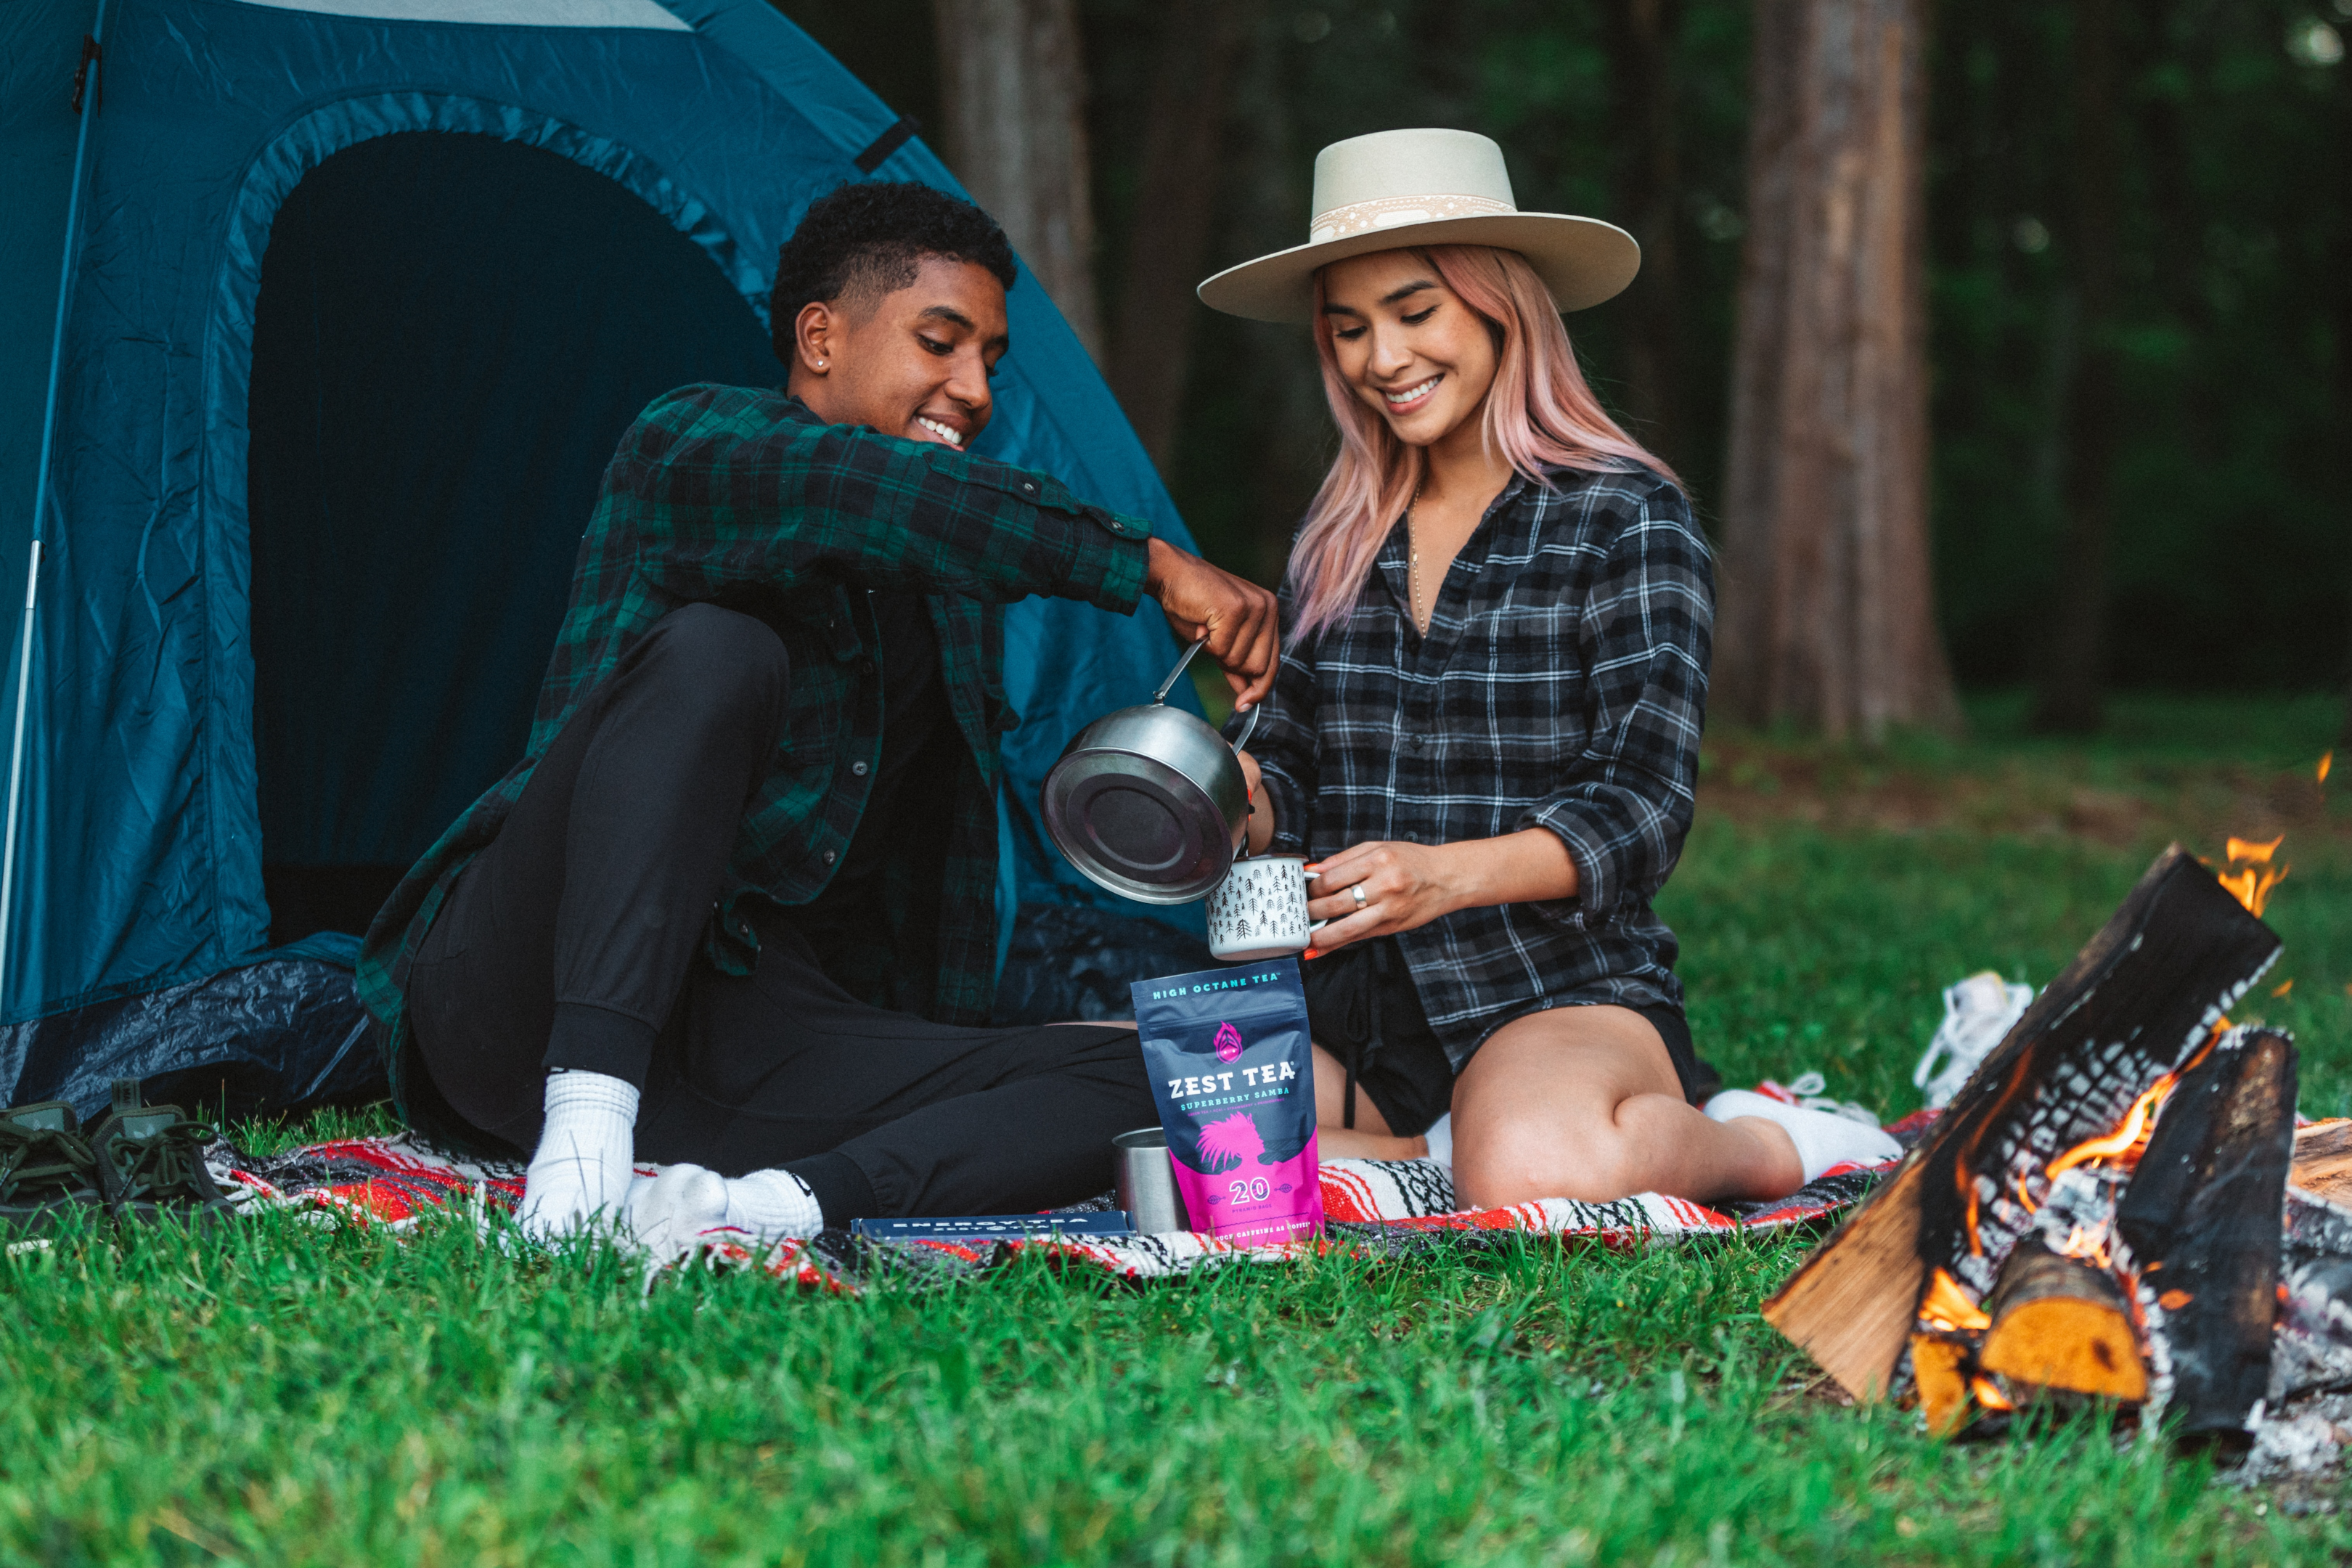 next camping trip, date ideas, romantic gifts for the favorite duo